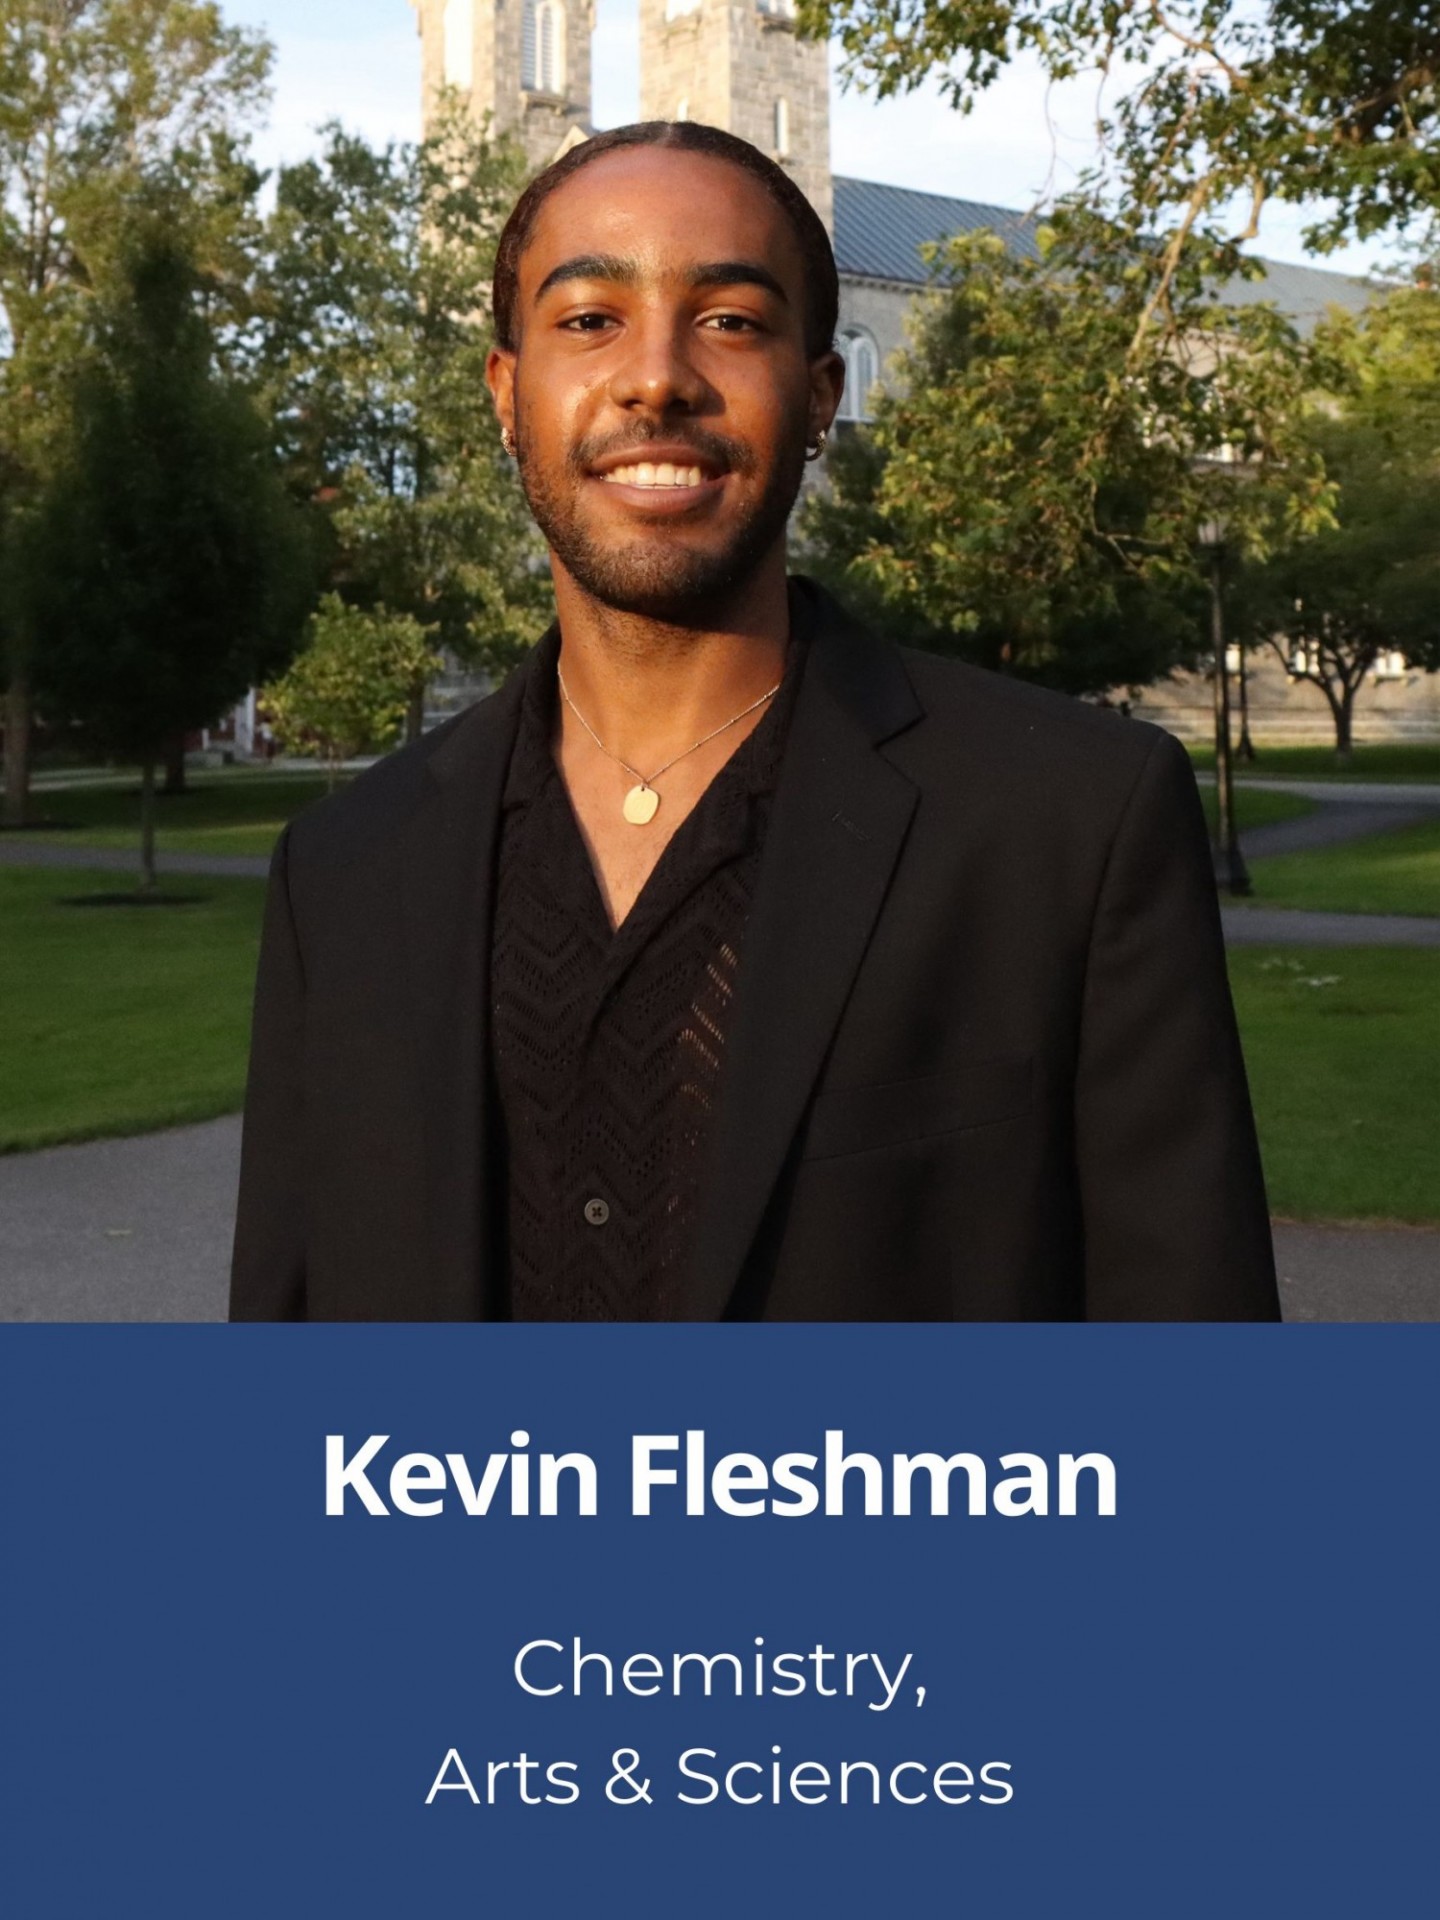 Headshot of Kevin Fleshman, Chemistry Arts & Sciences on a green background